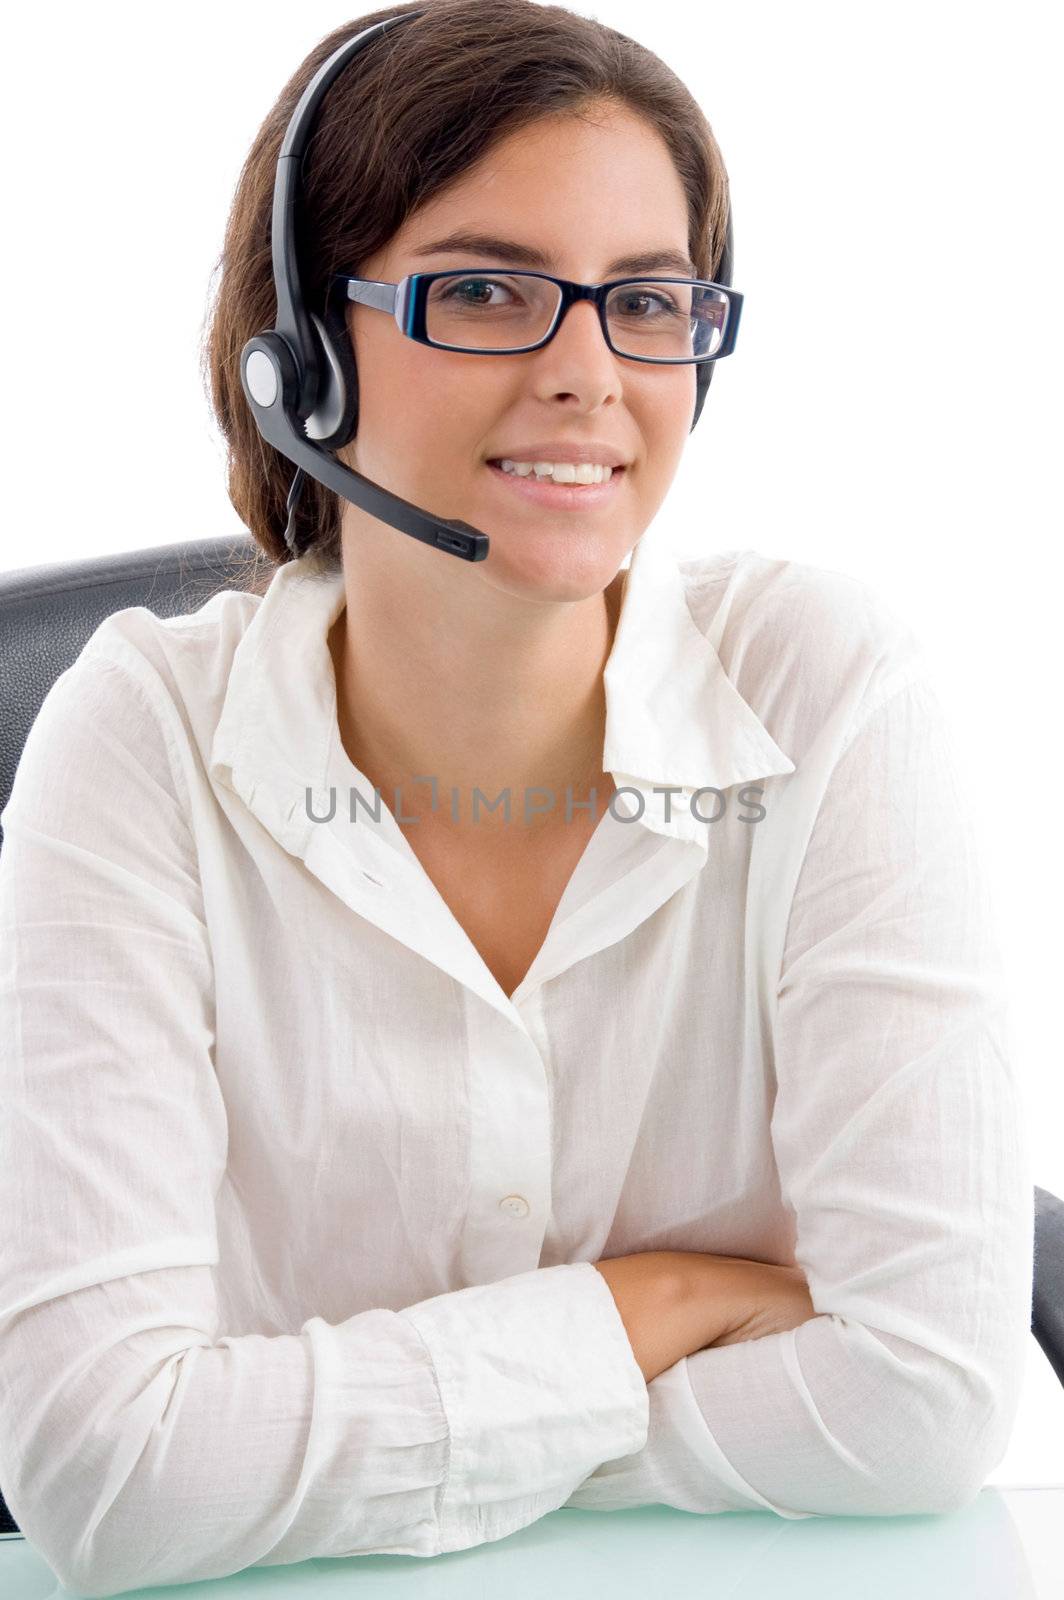 woman with headset and folded hands by imagerymajestic